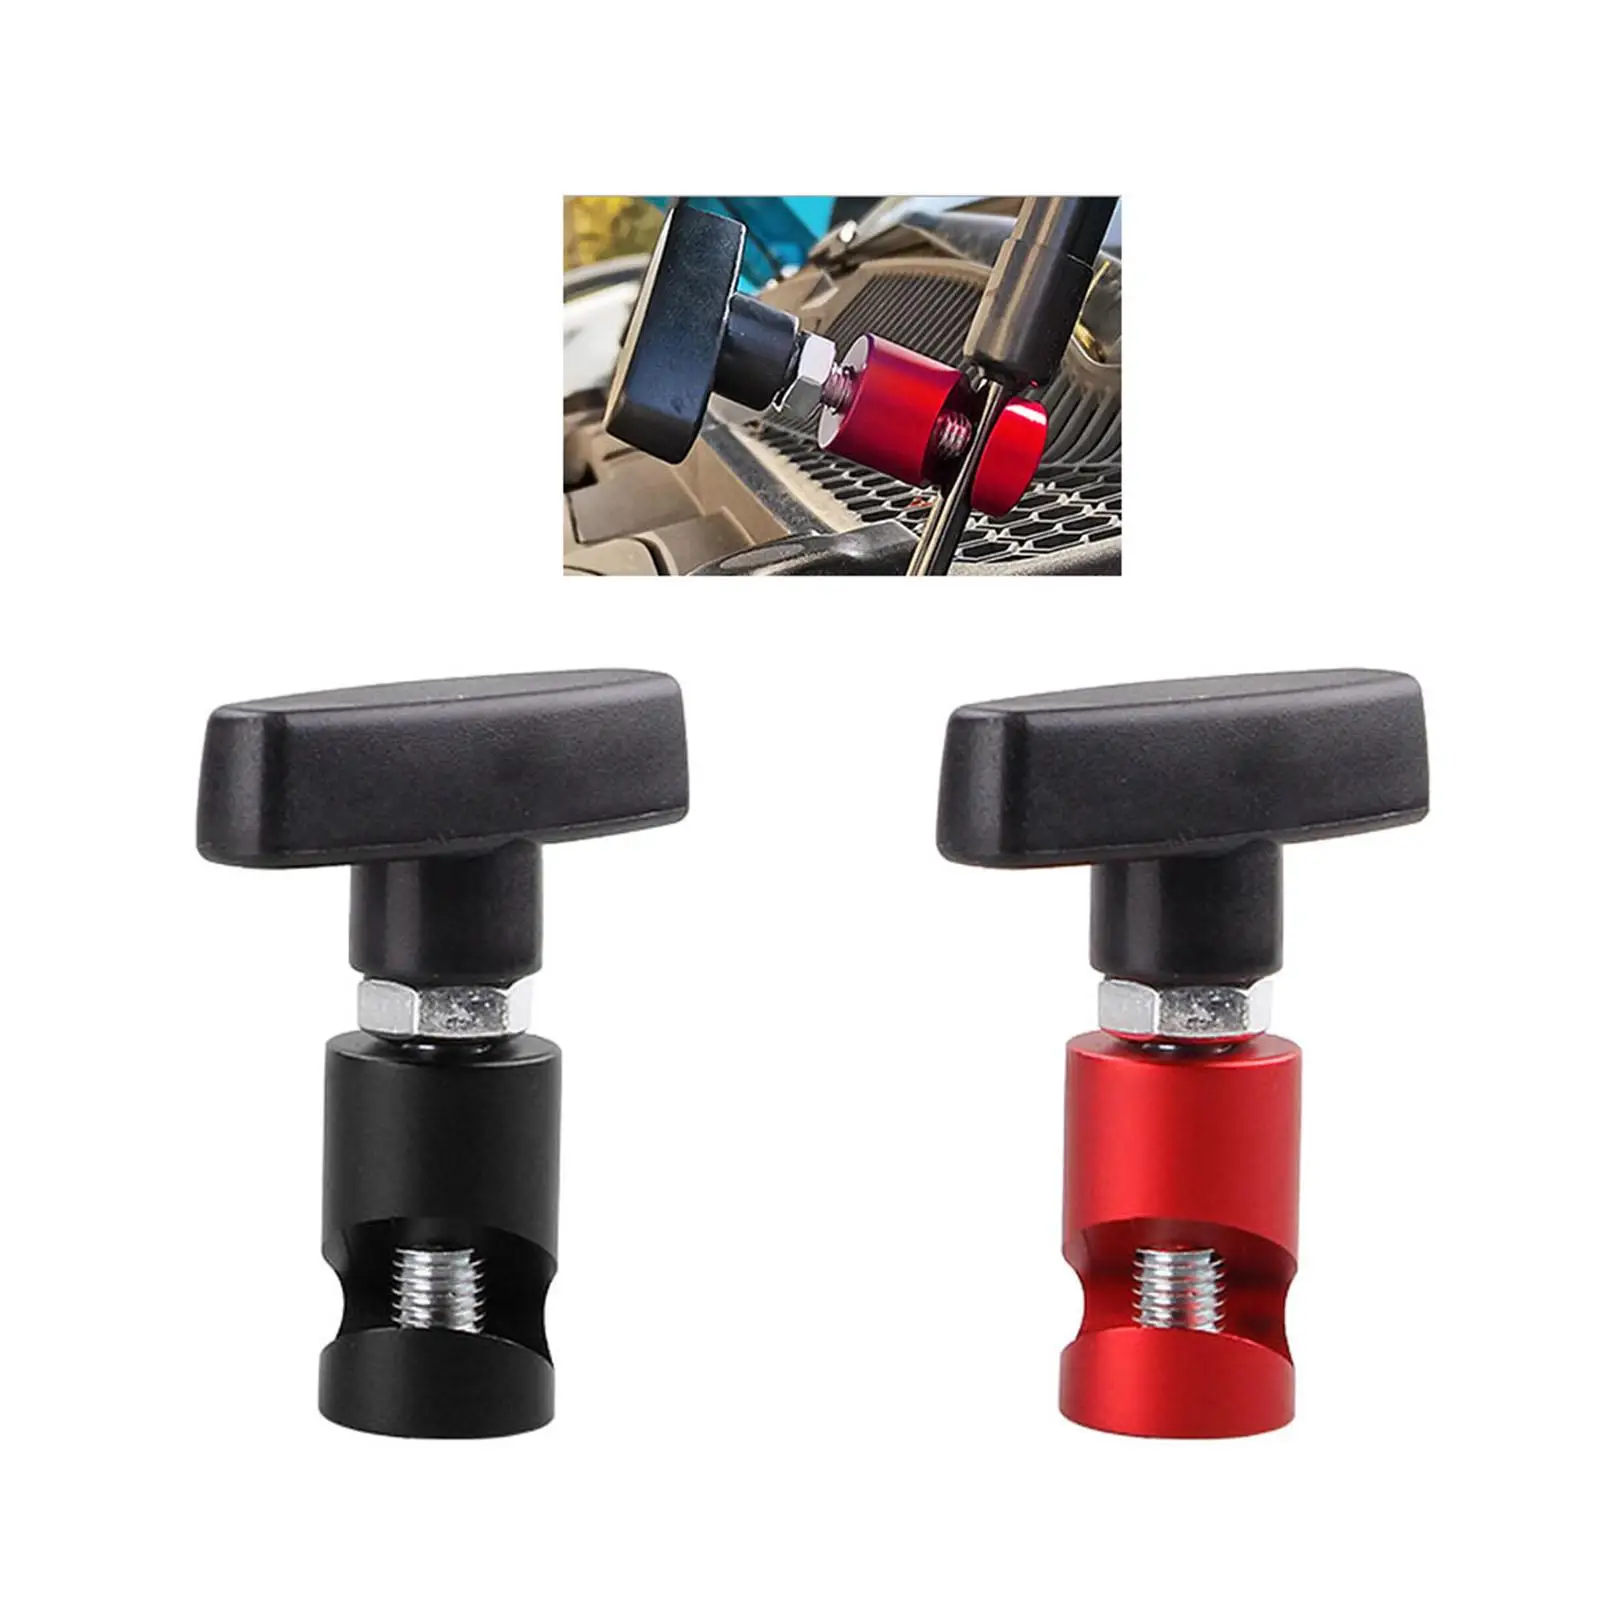 Lift Support Clamp for Car Prop Stopper Tool Auto Hood Lift Rod Retainer for Car